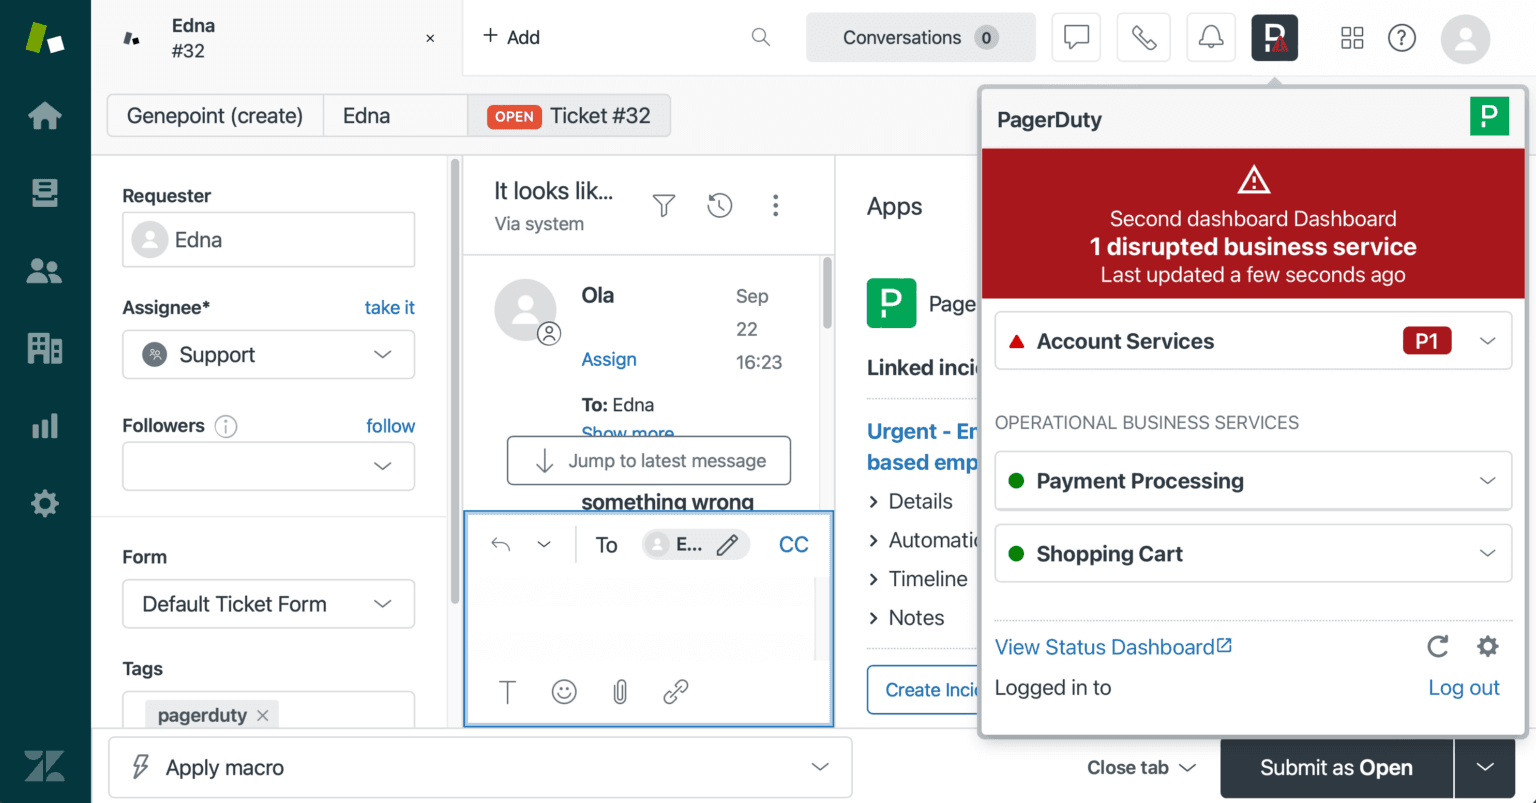 pagerduty-app-for-zendesk-v3.7-status-dashboard-1536x803.png